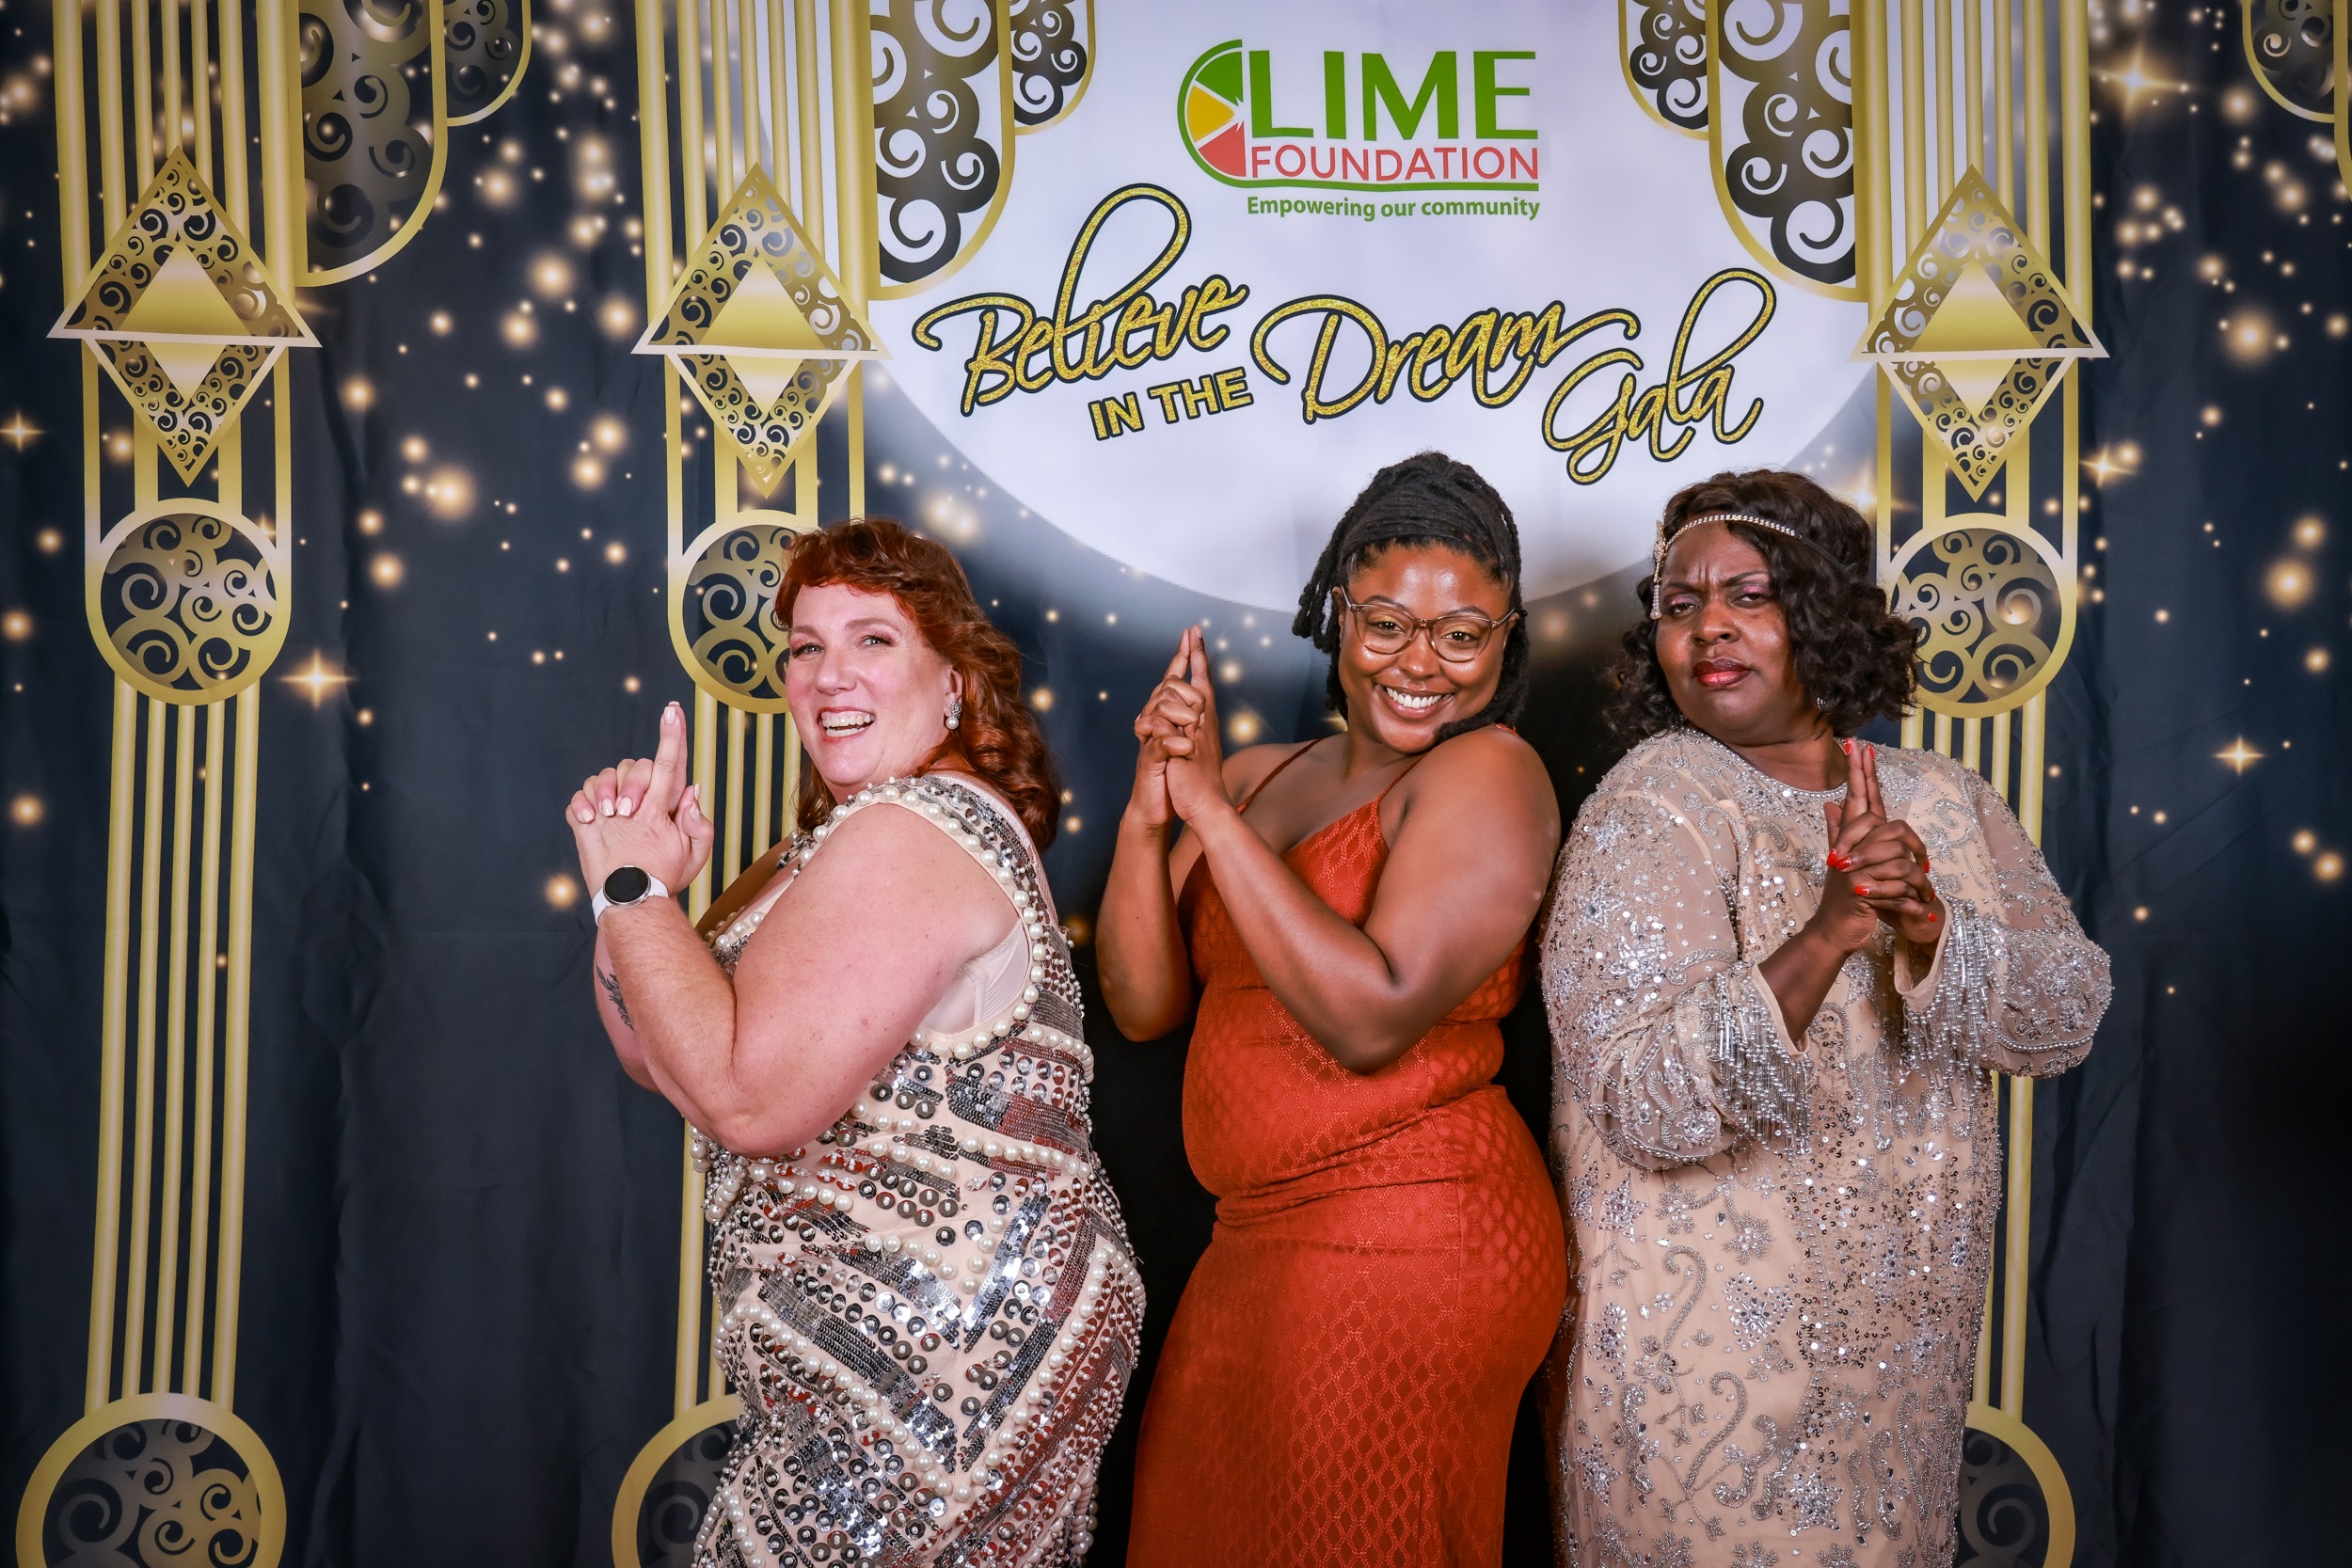 Three women posing for a photo at a 1920s themed party hosted by The LIME Foundation of Santa Rosa.